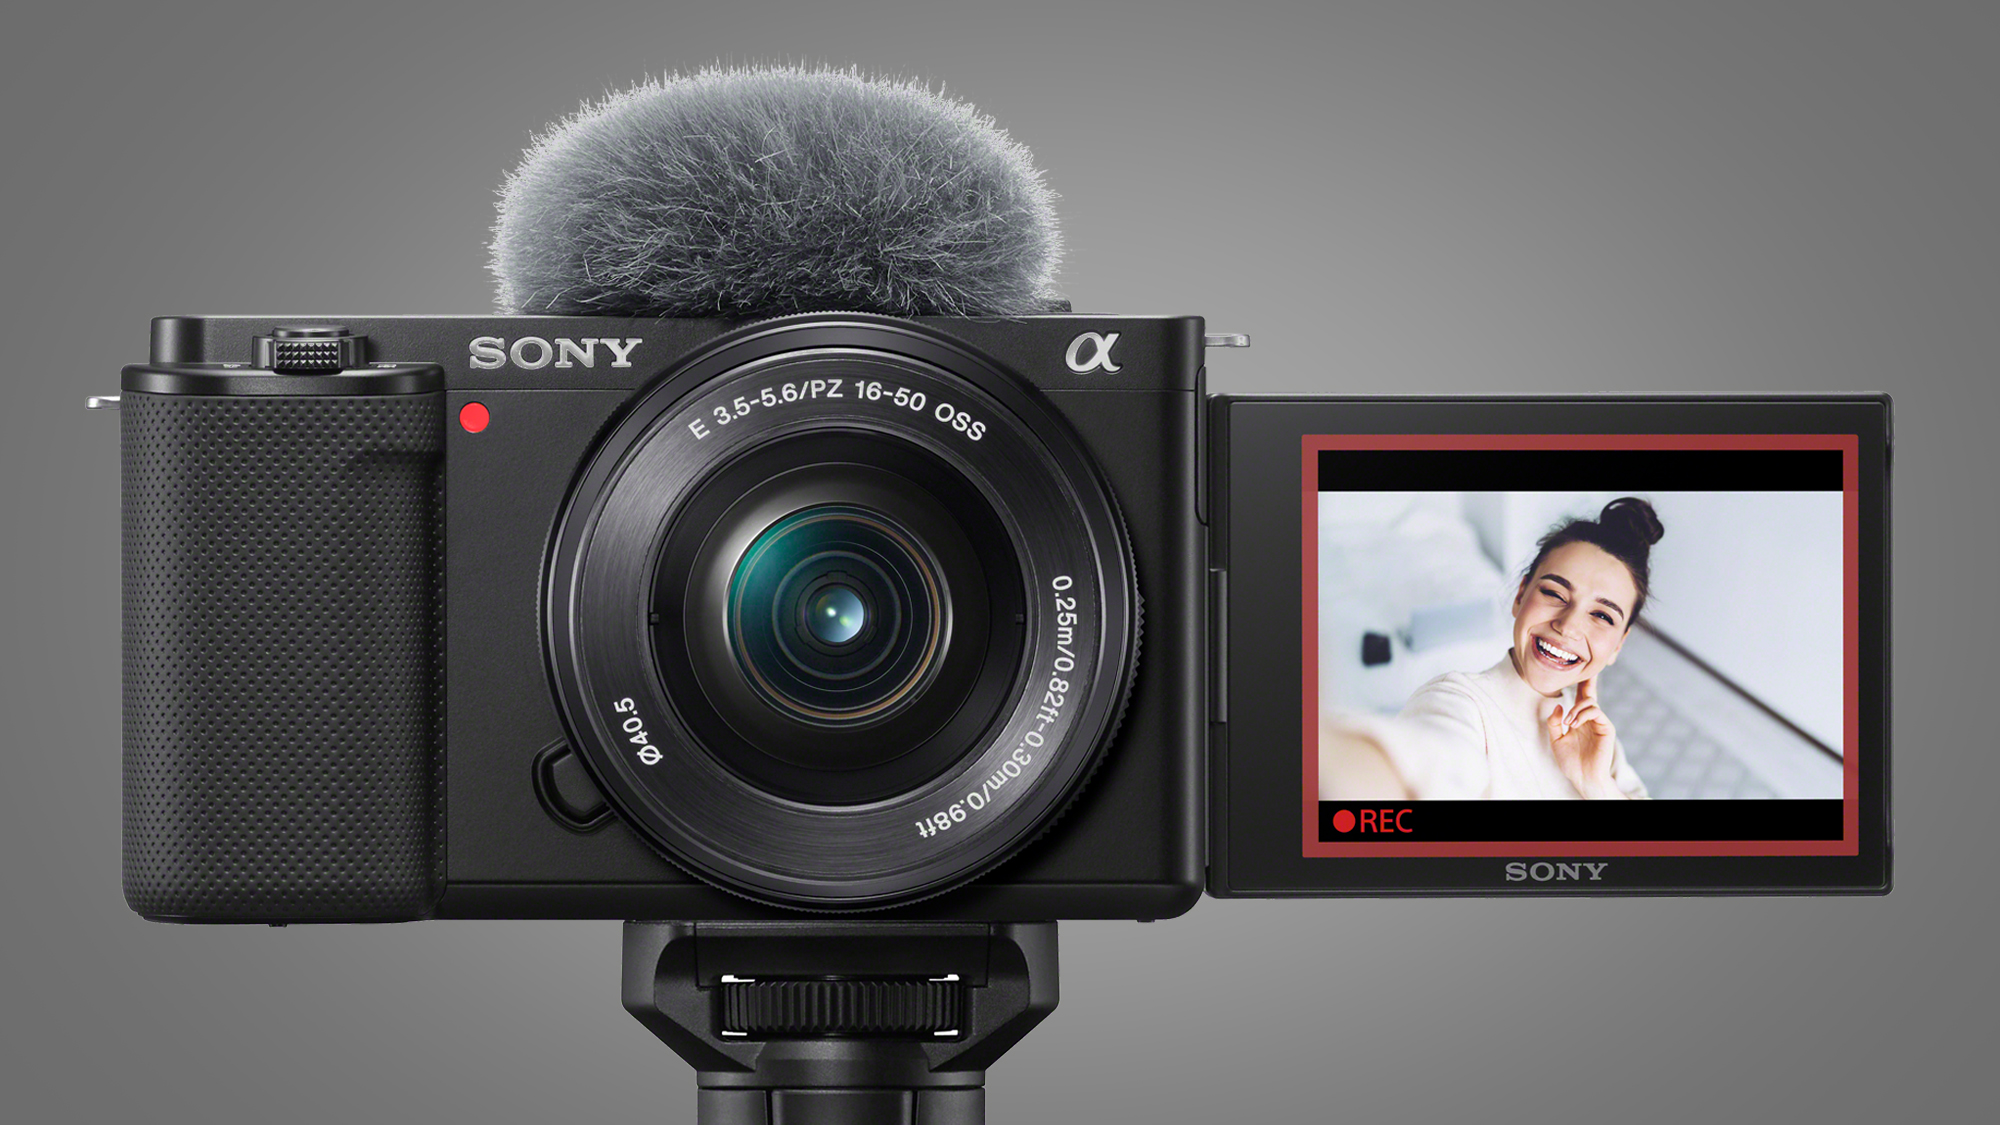 Sony ZV-E10 Mark II Coming Before August 2024 « NEW CAMERA